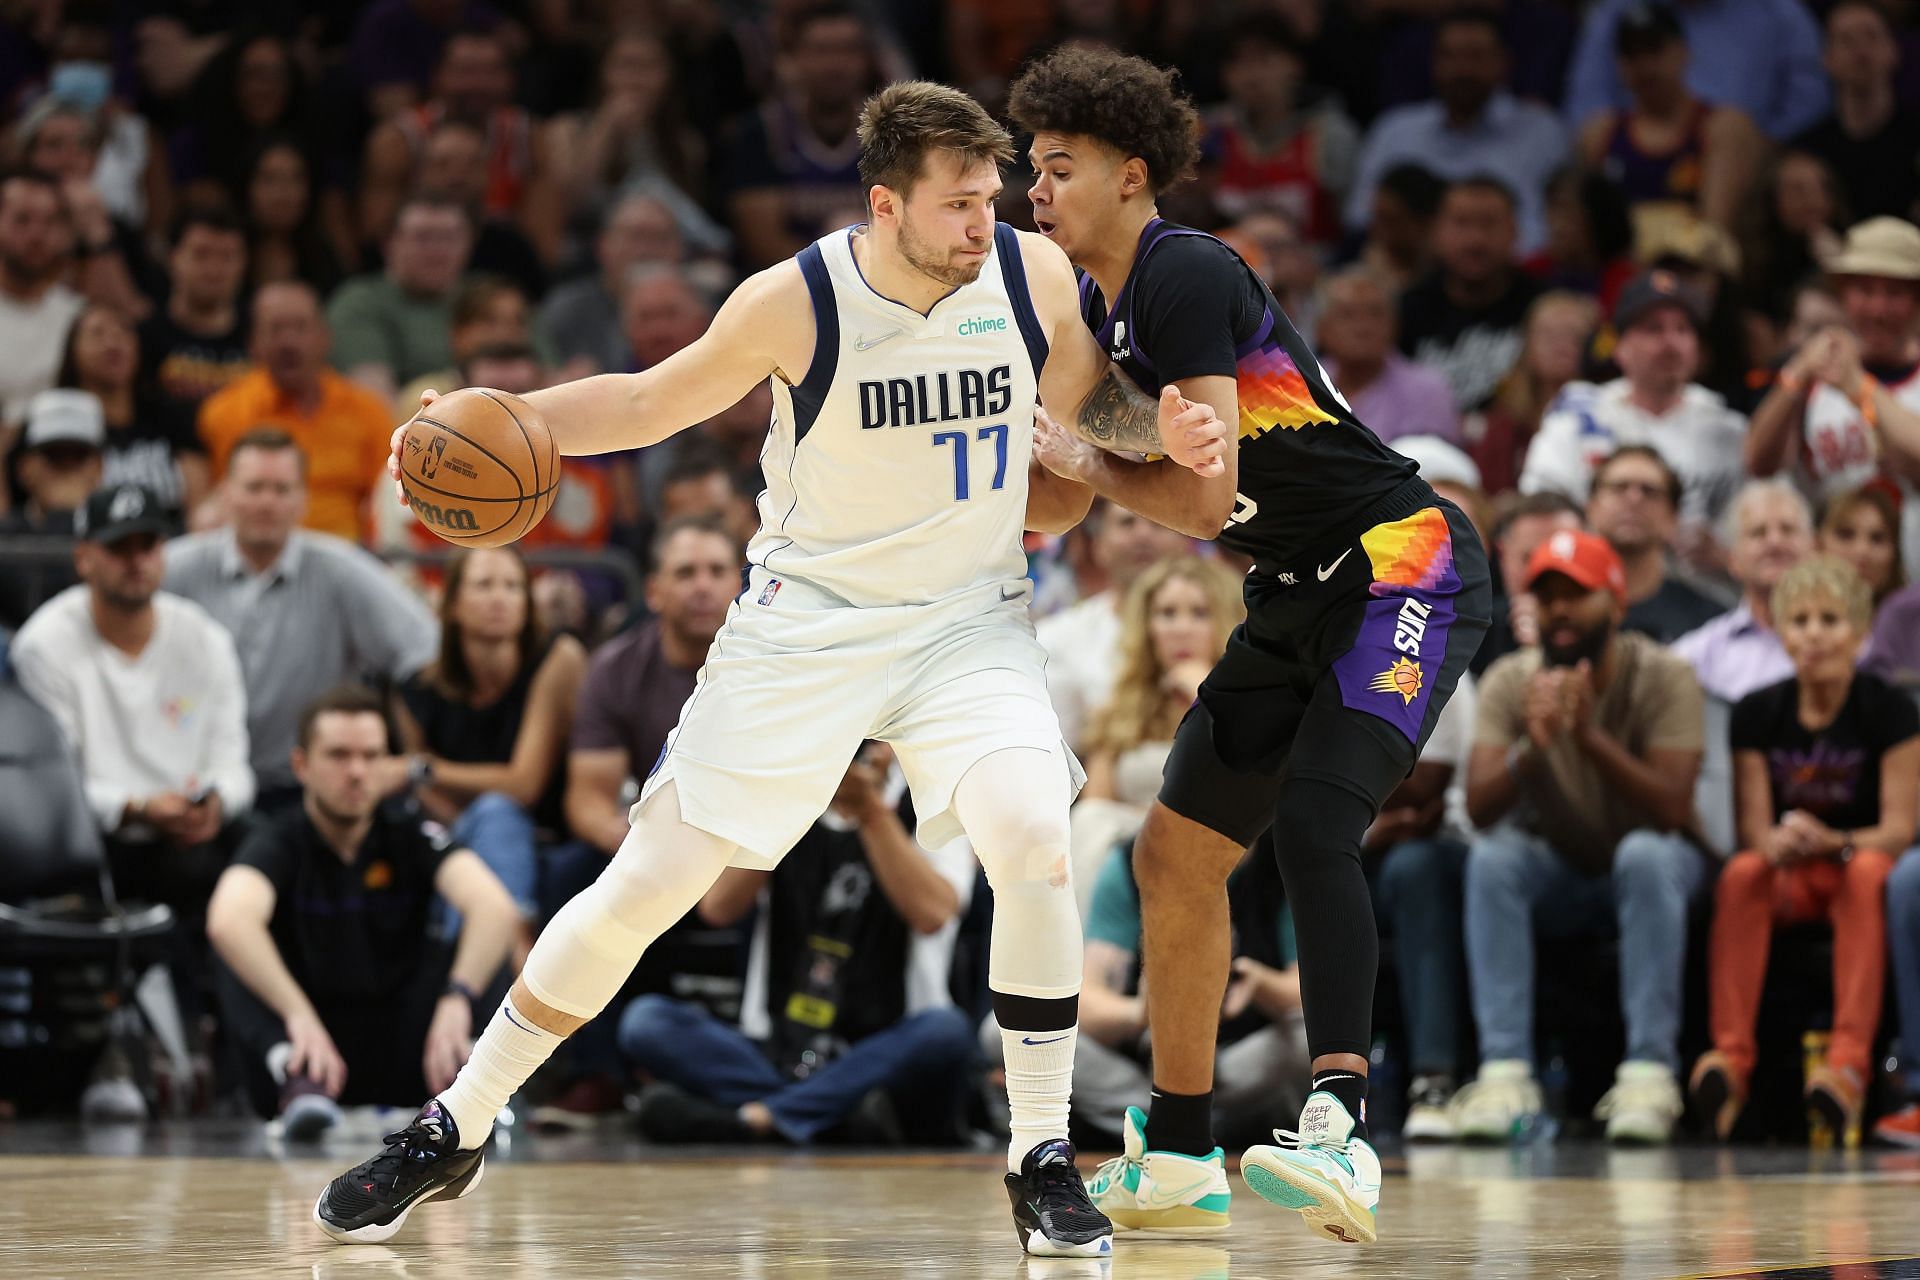 The Mavericks suffered a 30-point blowout loss in Game 5